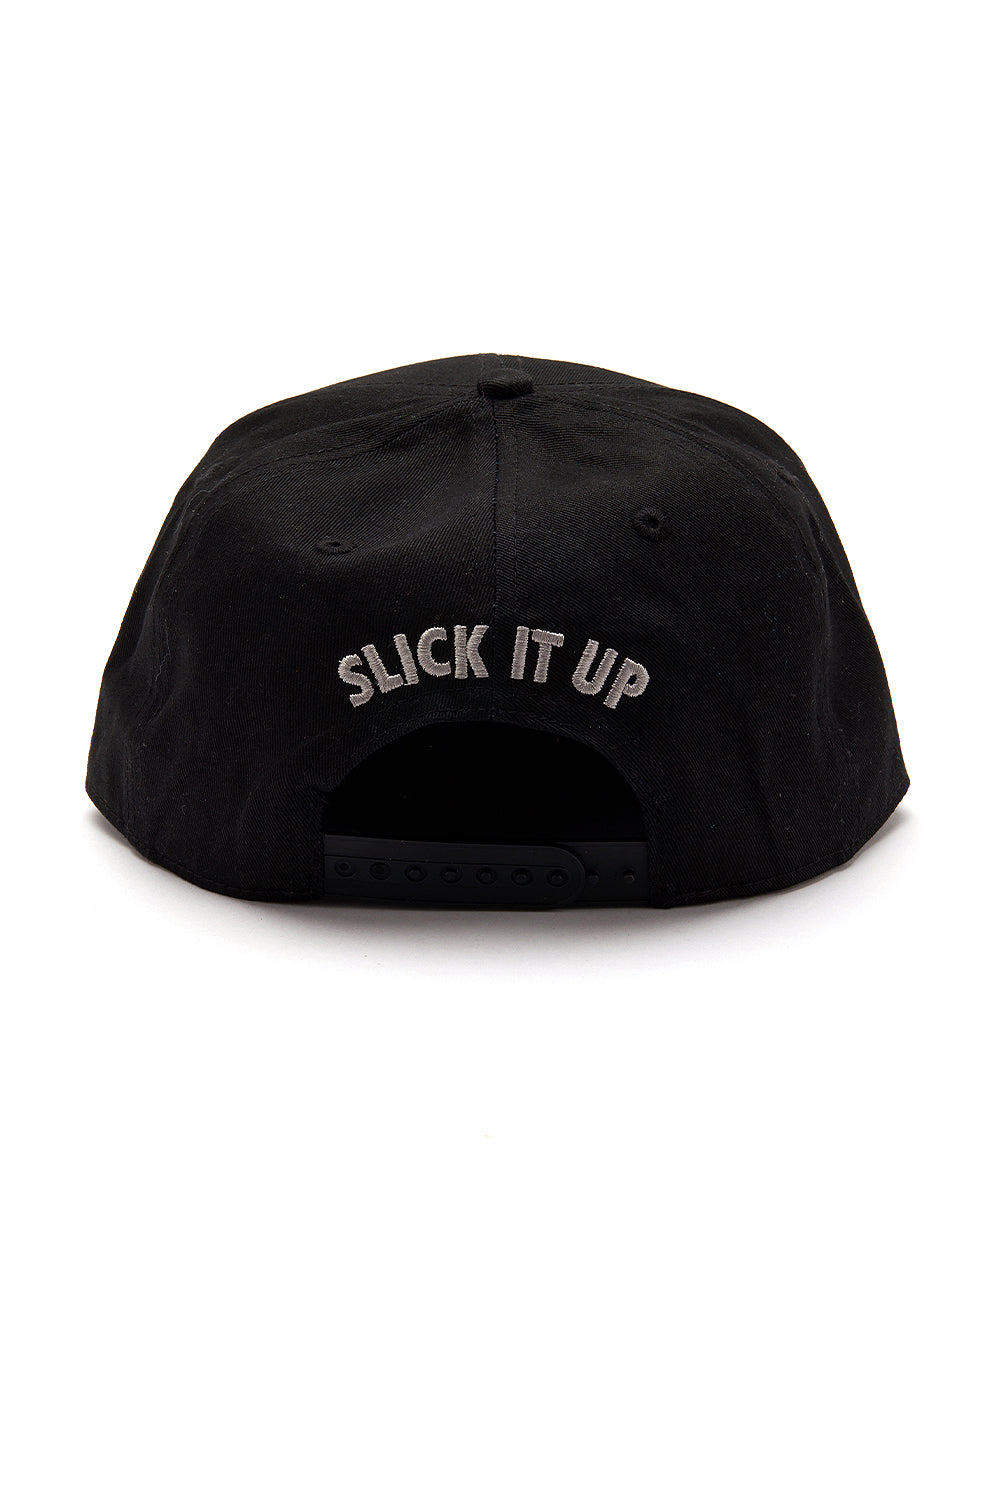 New York Meatheads Team Snap Back Hat (Limited Edition) - Slick It Up 